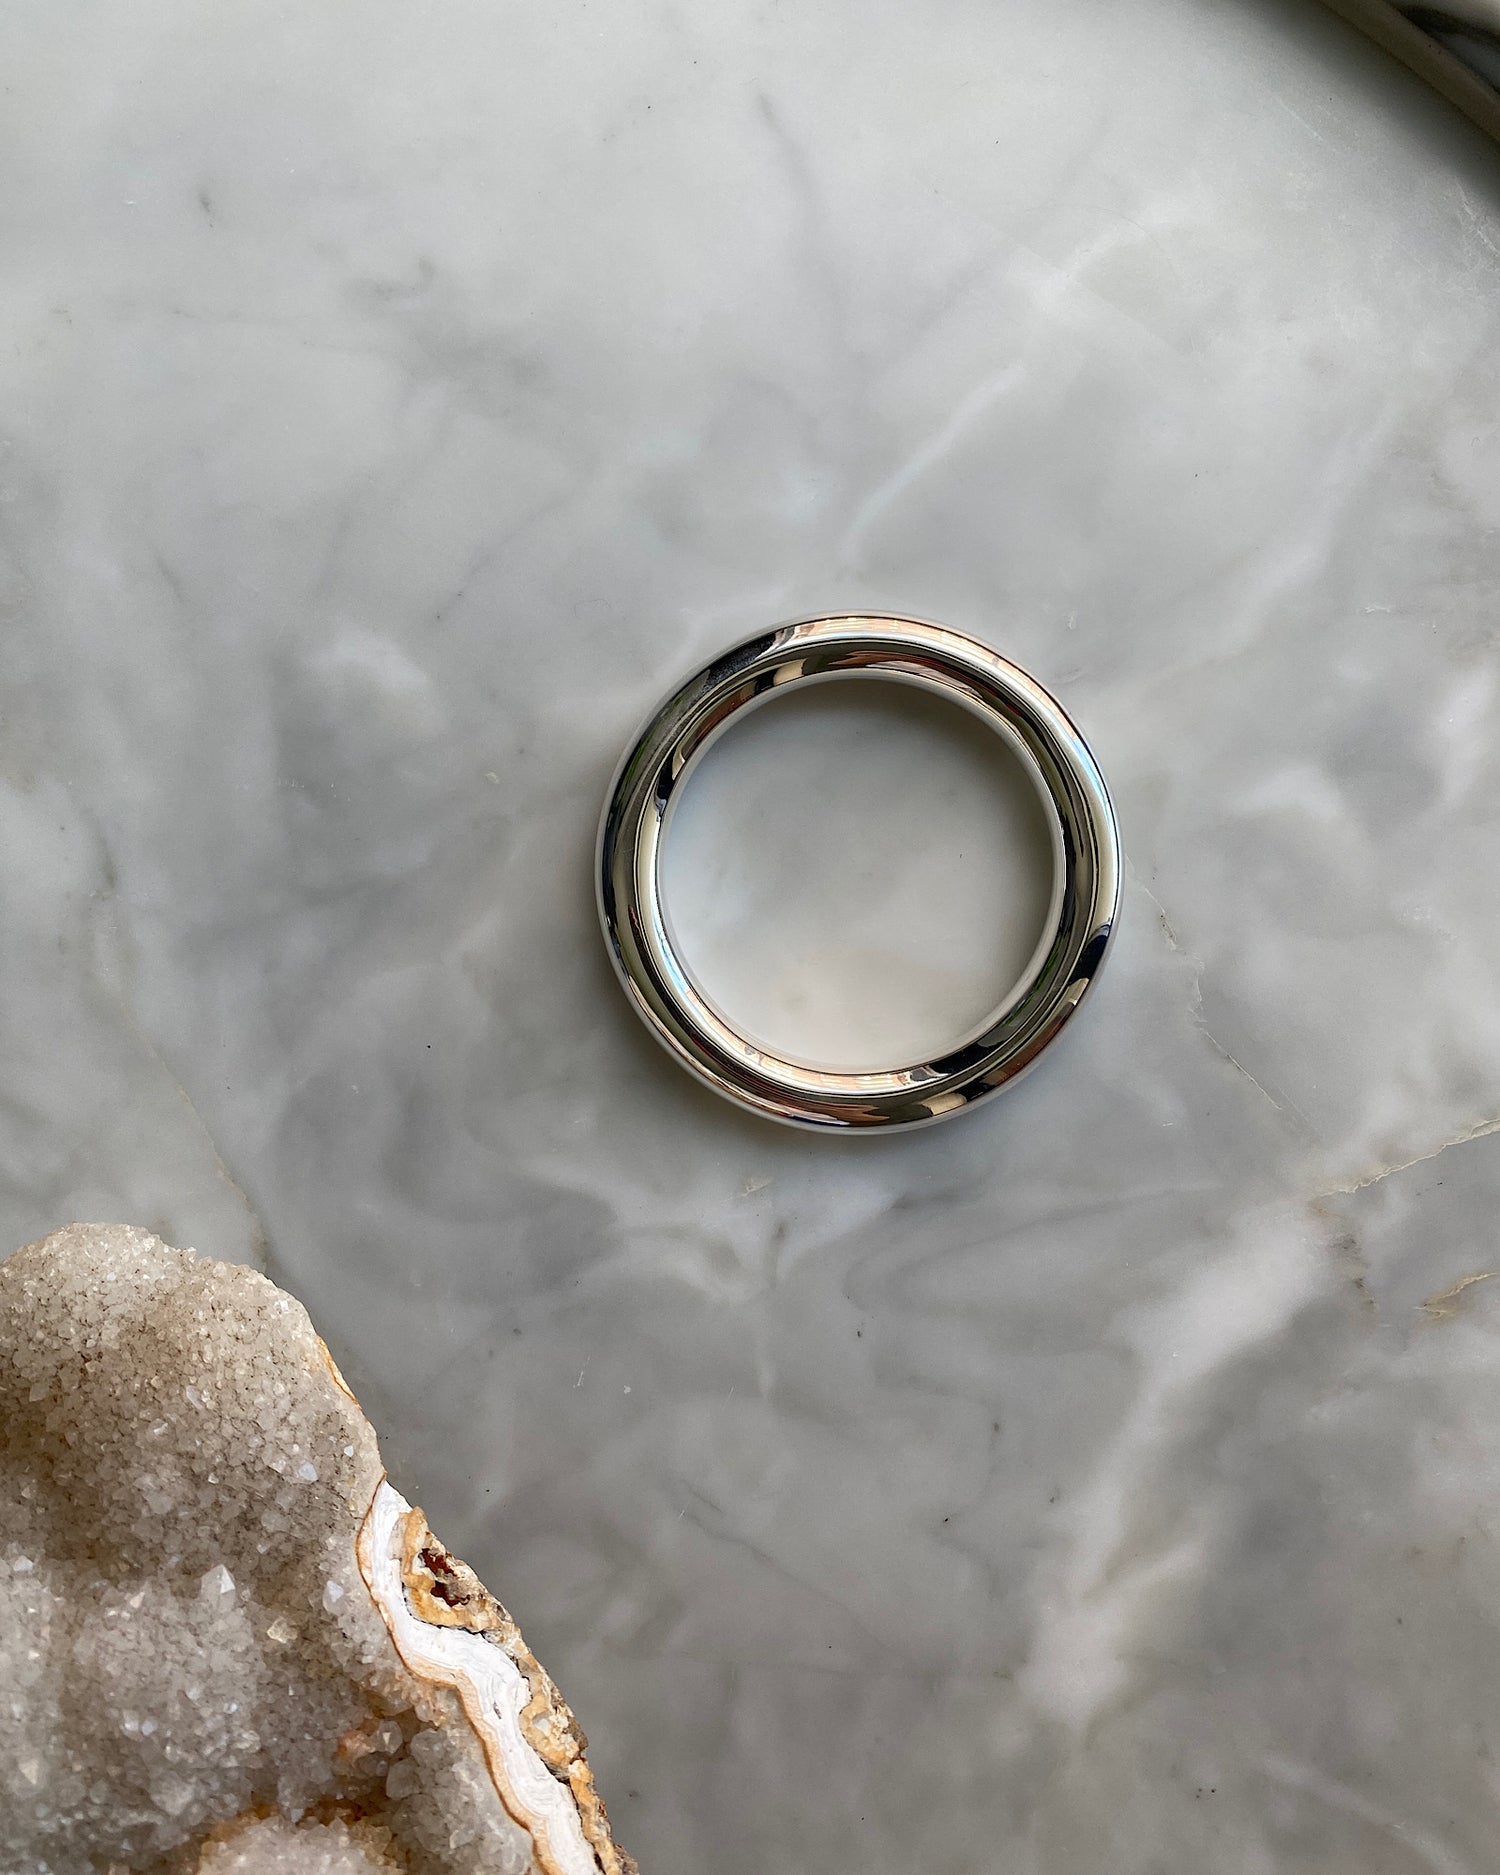 wide tube like sterling silver bangle sits on marble